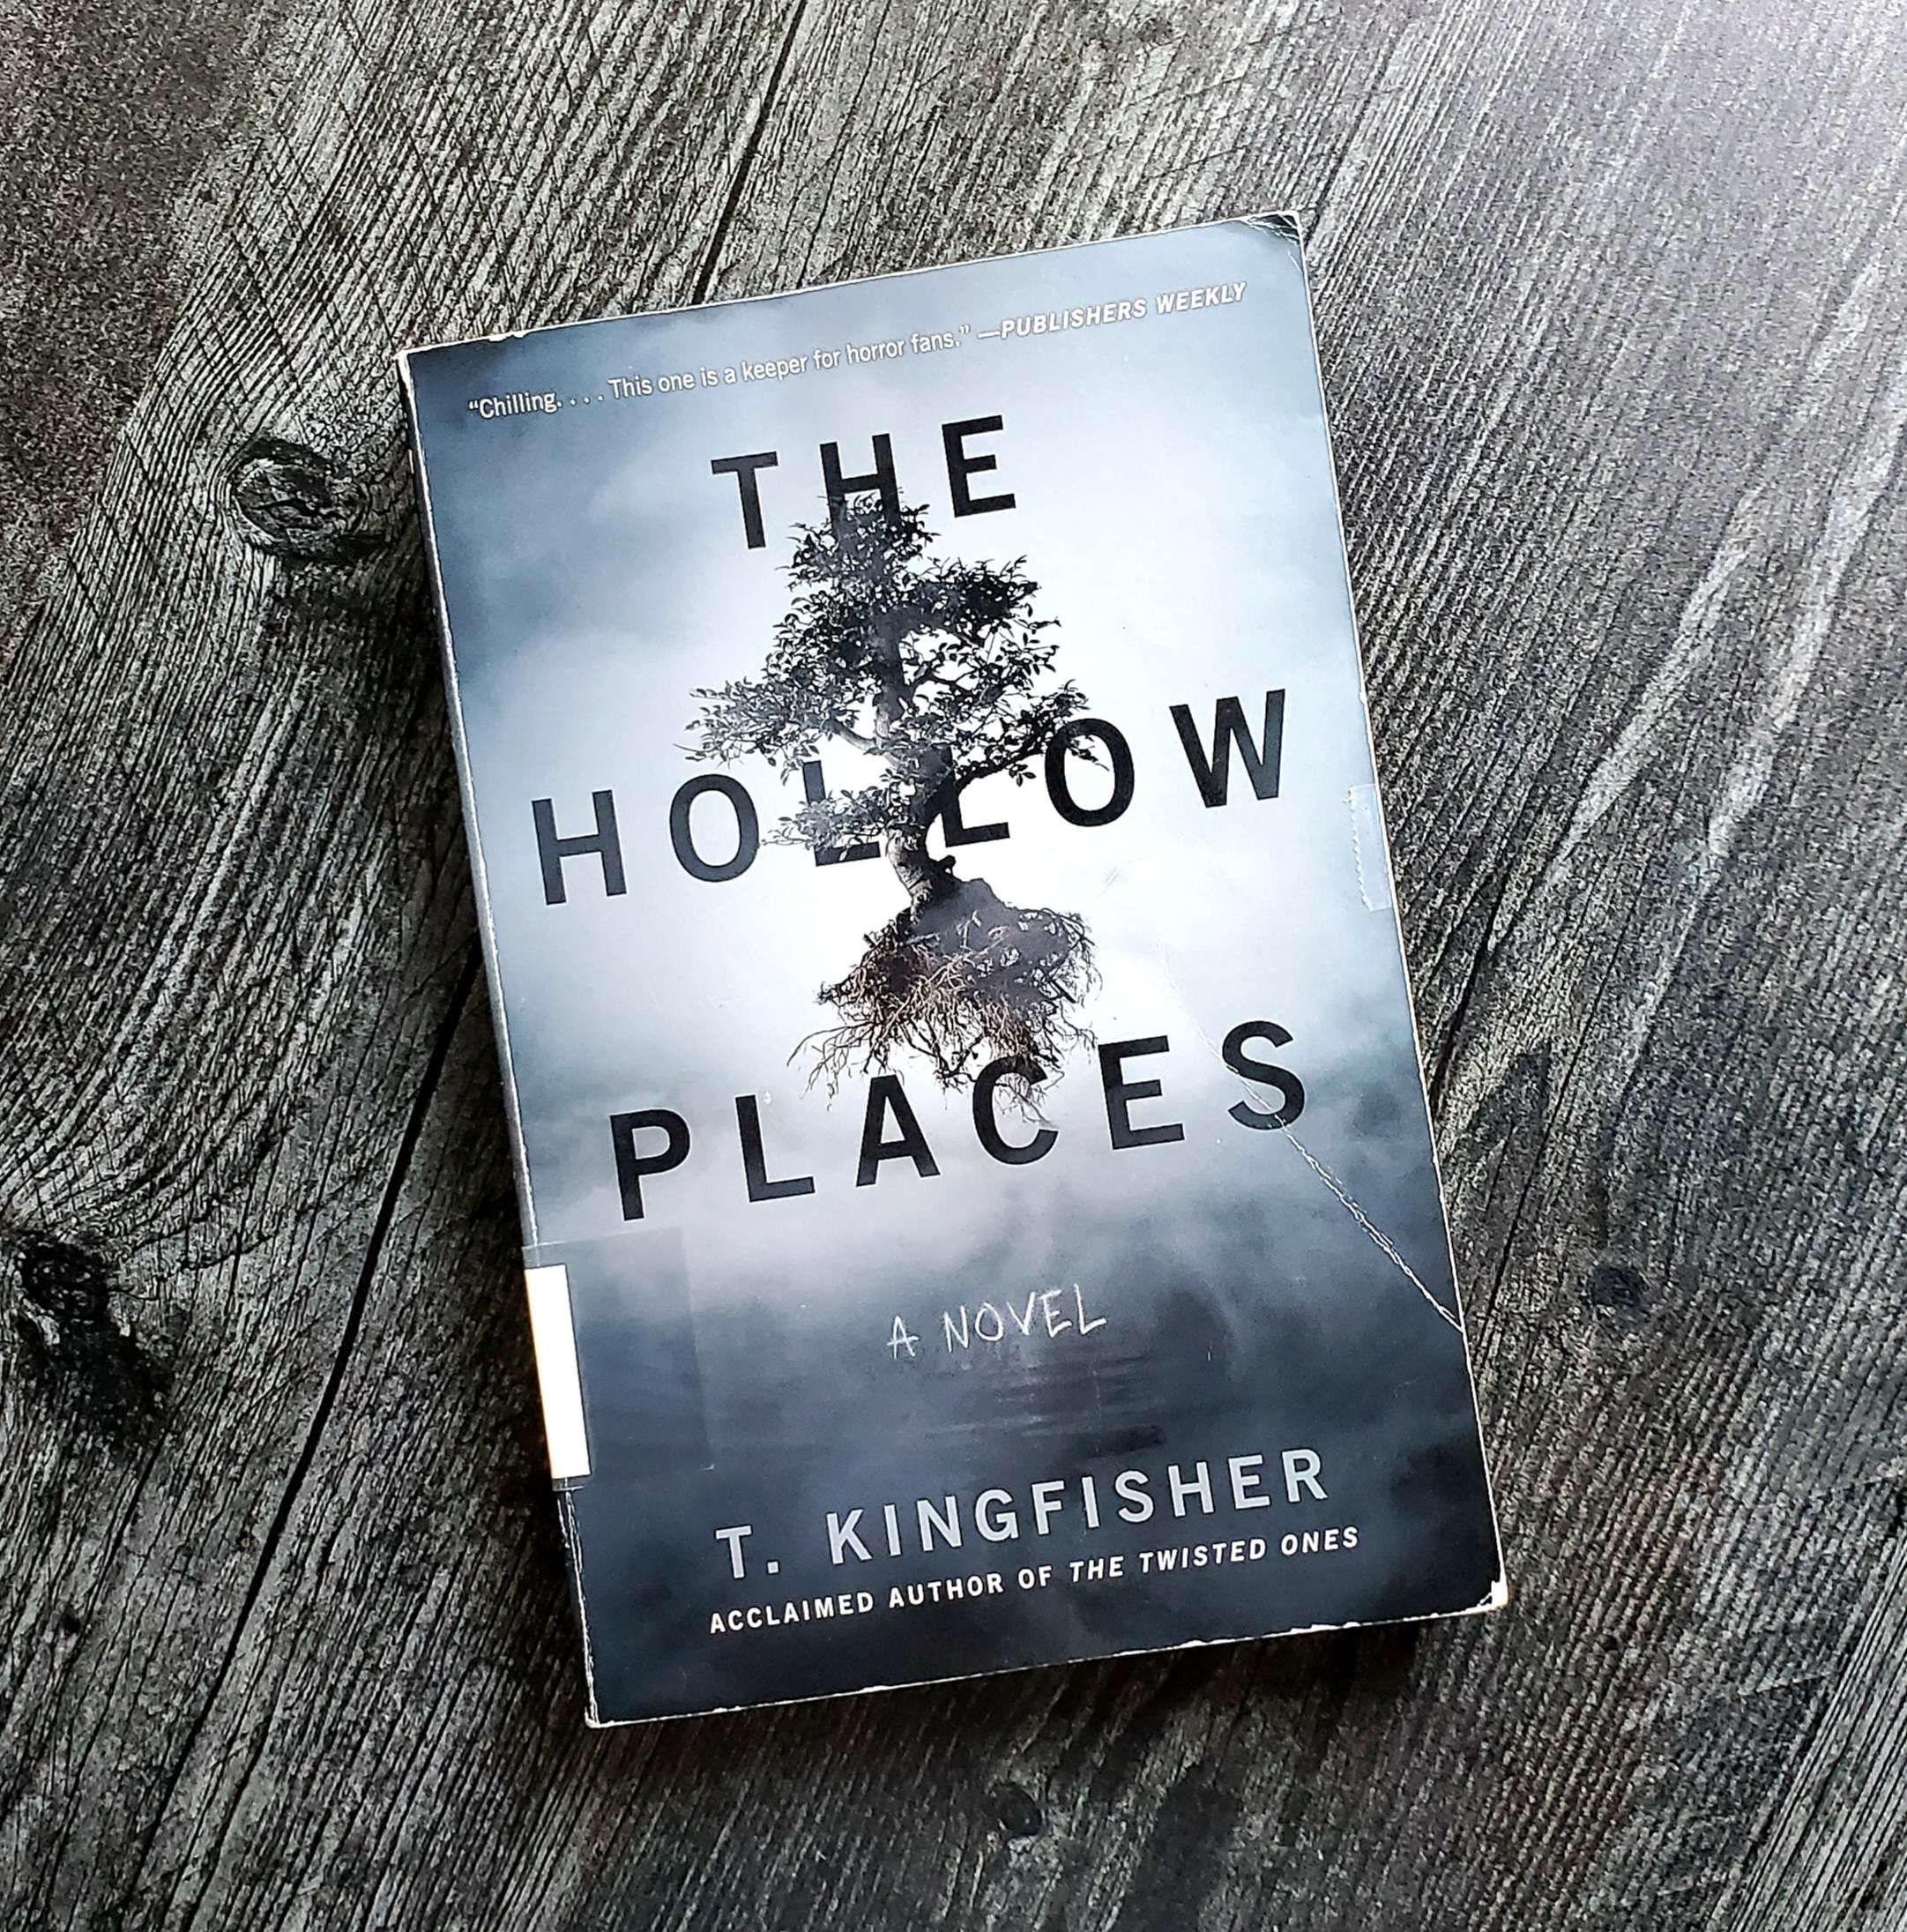 Book Review of THE HOLLOW PLACES